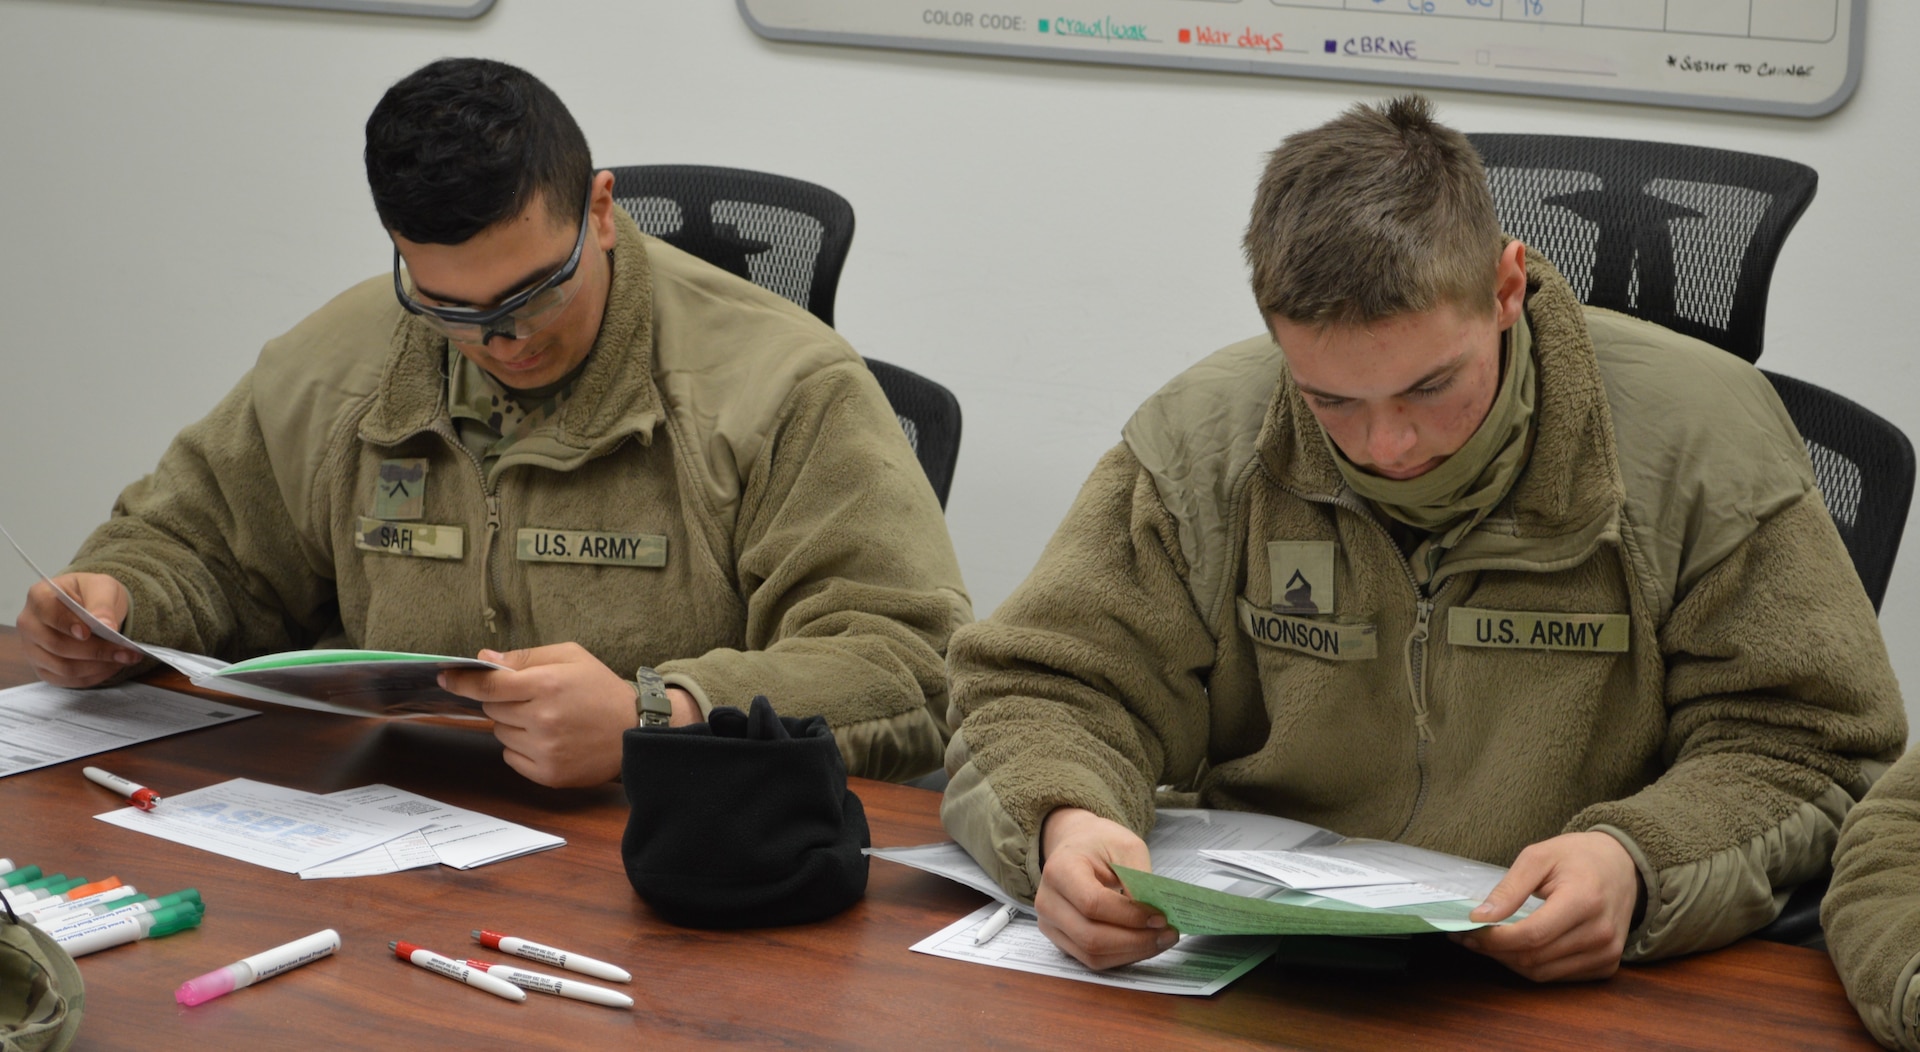 Army Pvts. Joshua Monson and Rami Safi review the blood donor information before donating. Both soldiers are completing training at the Joint Base San Antonio-Camp Bullis Soldier Medic Training Site and volunteered to donate blood.